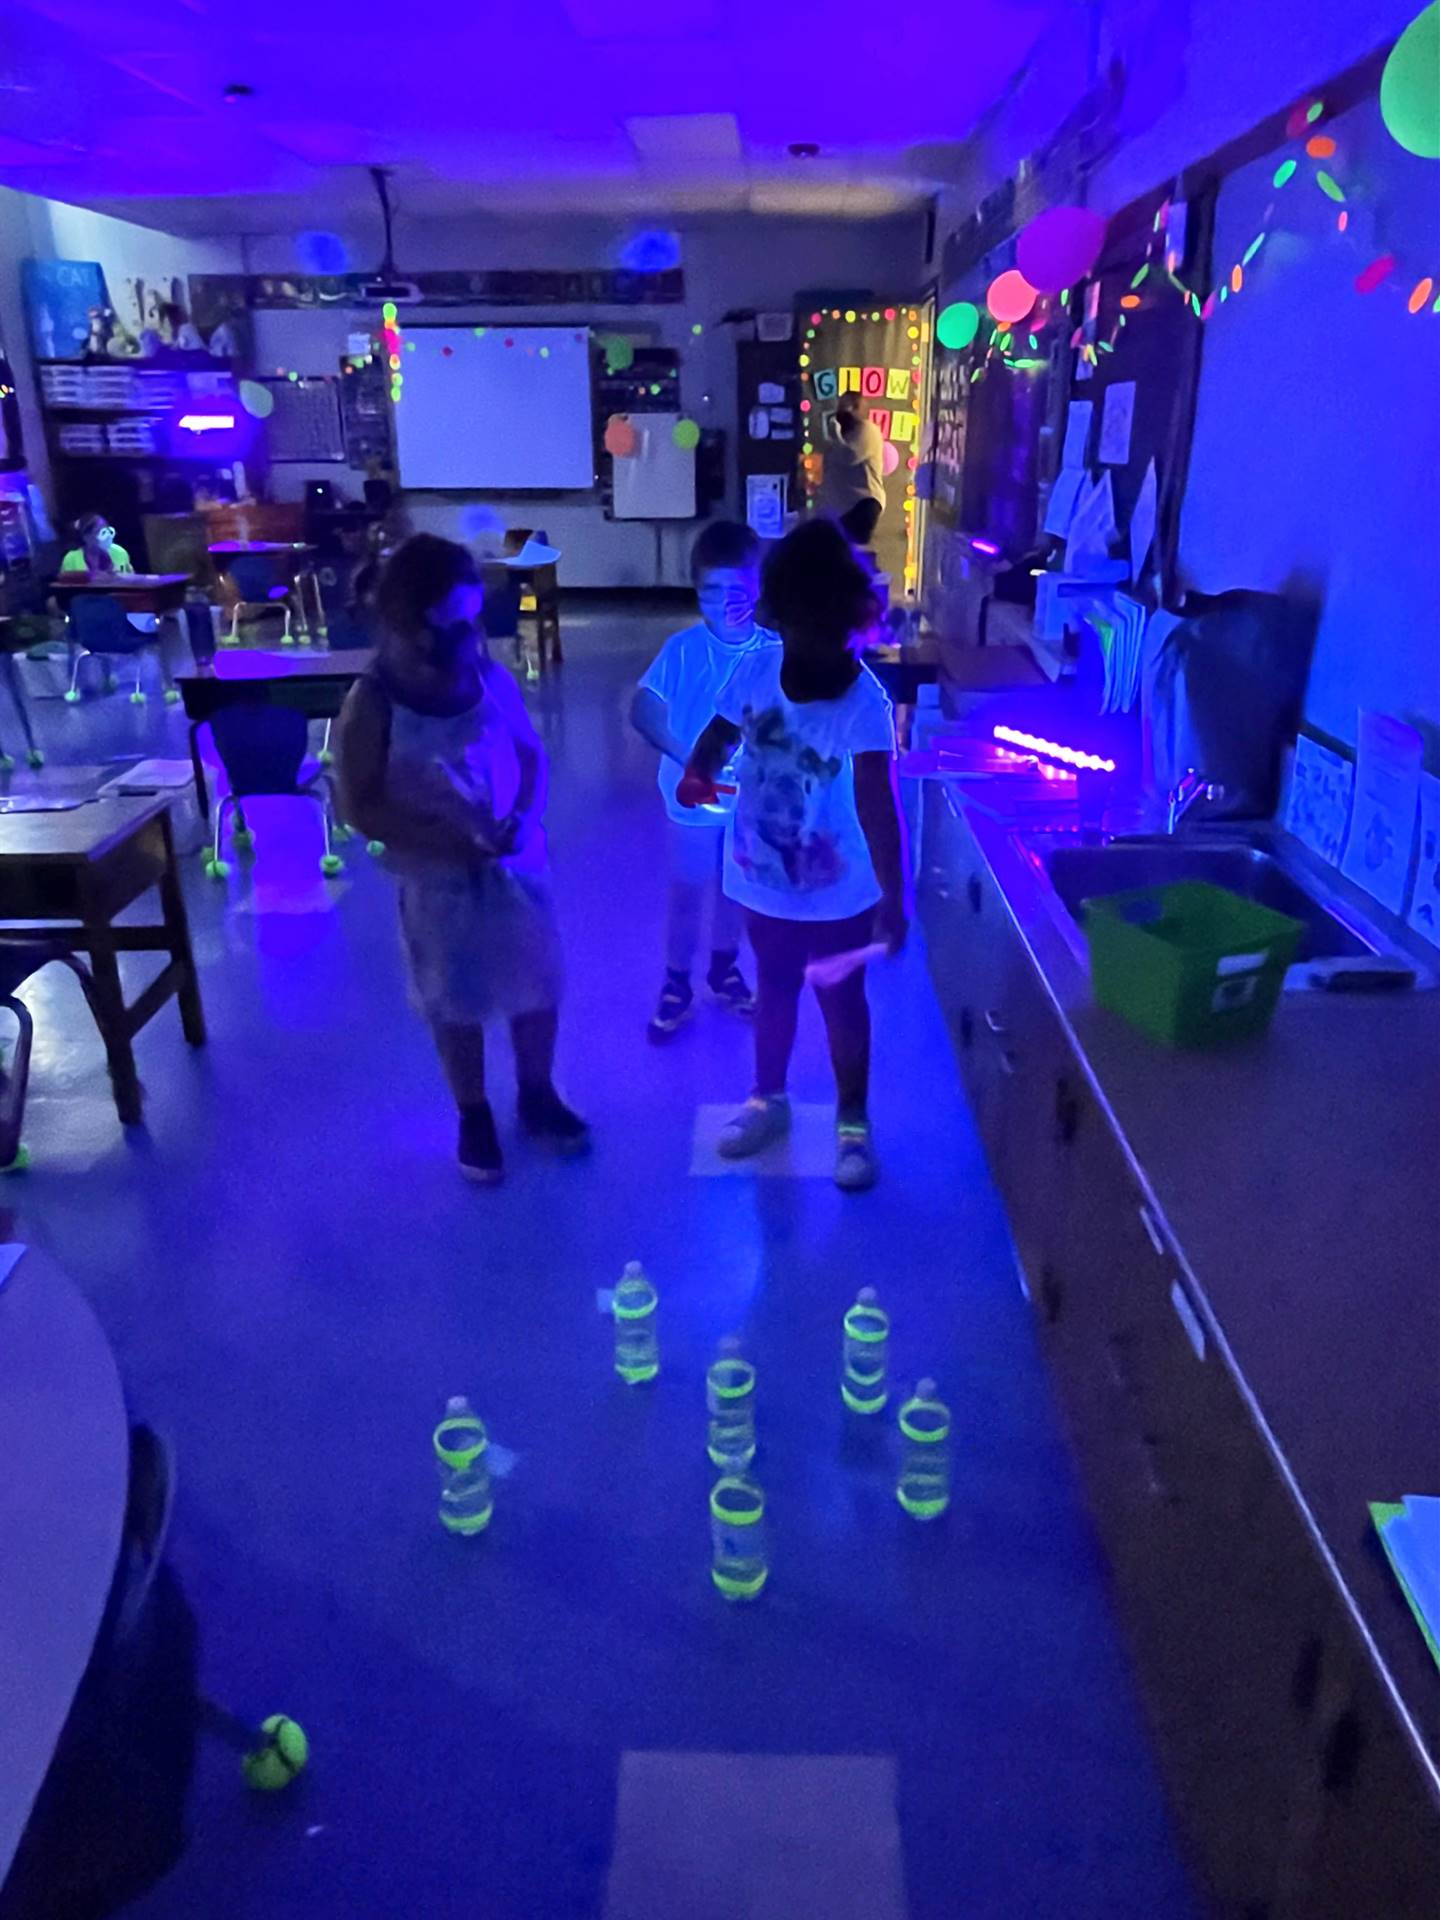 Student fun with "glowing" items